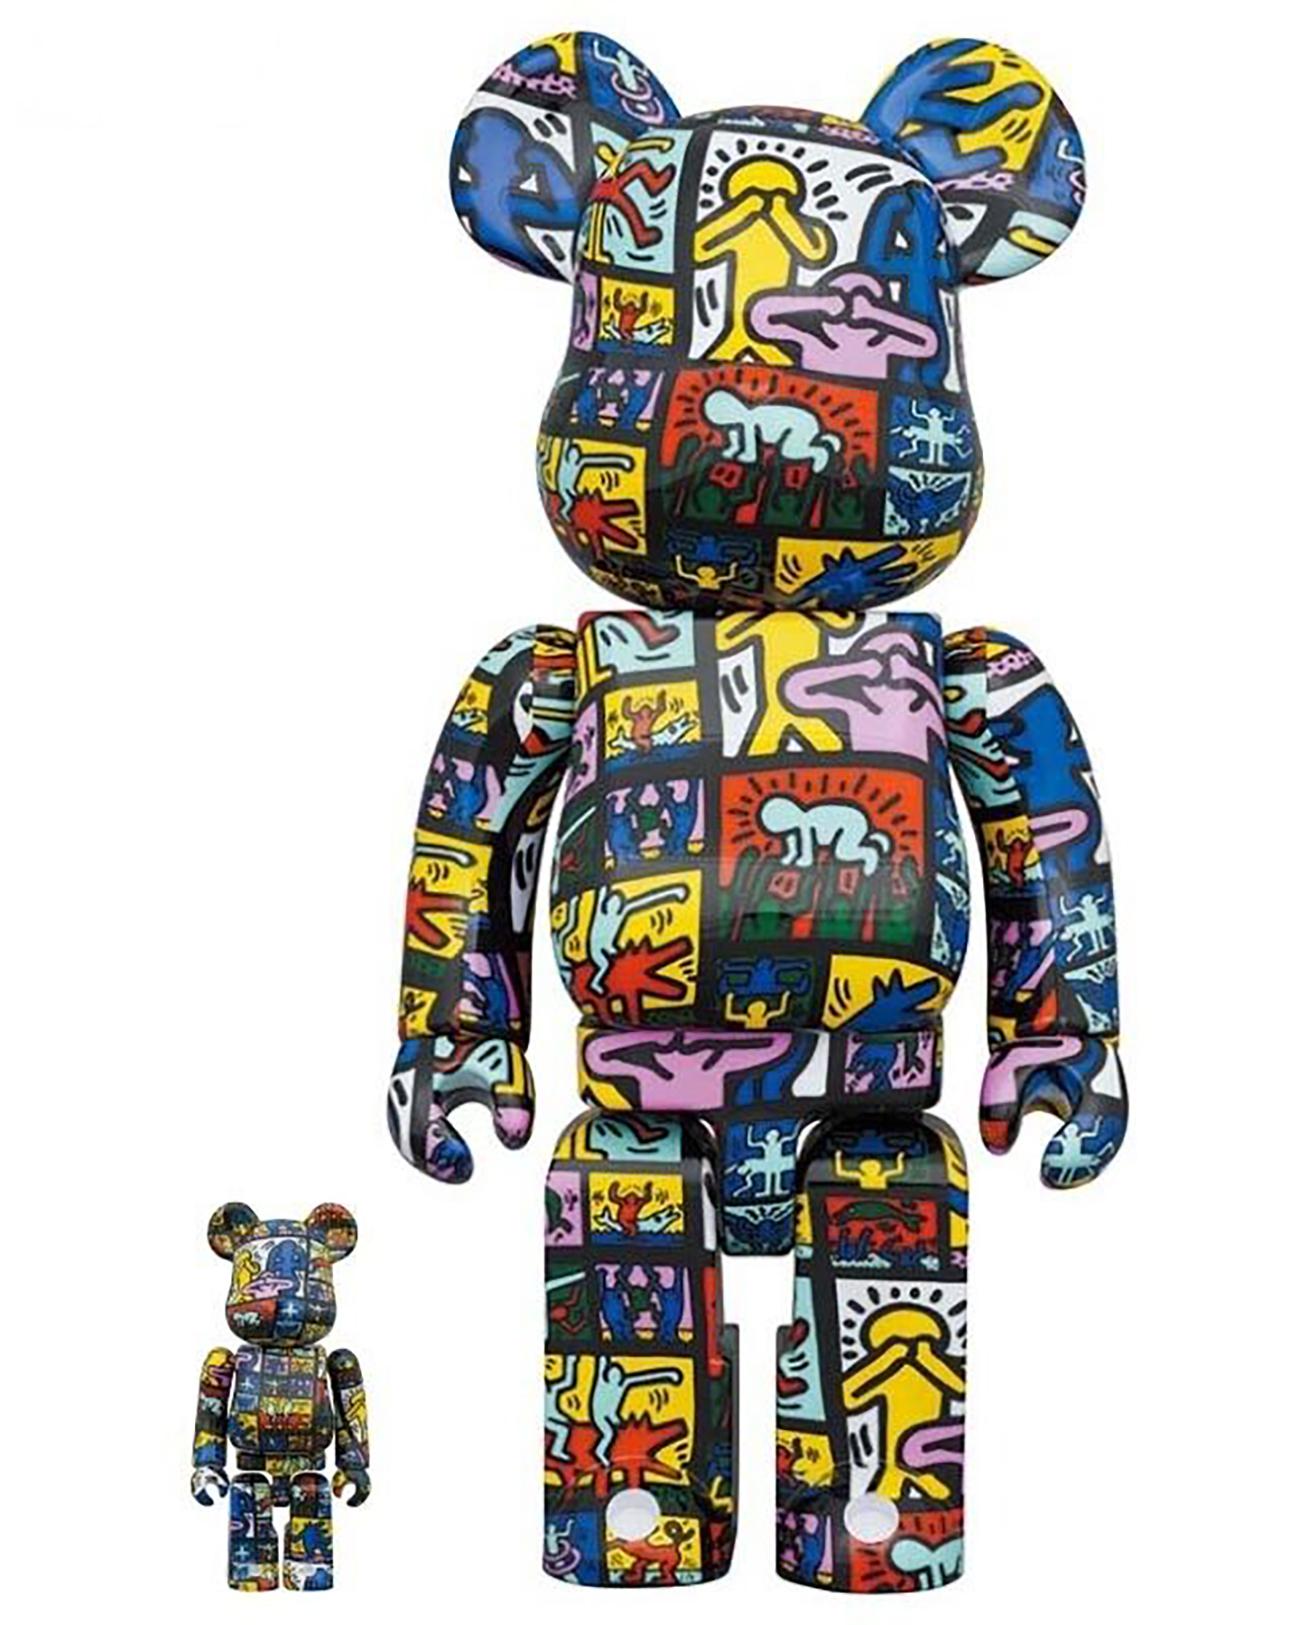 Keith Haring Bearbrick 400 %  Keith Haring BE@RBRICK  - Sculpture de (after) Keith Haring